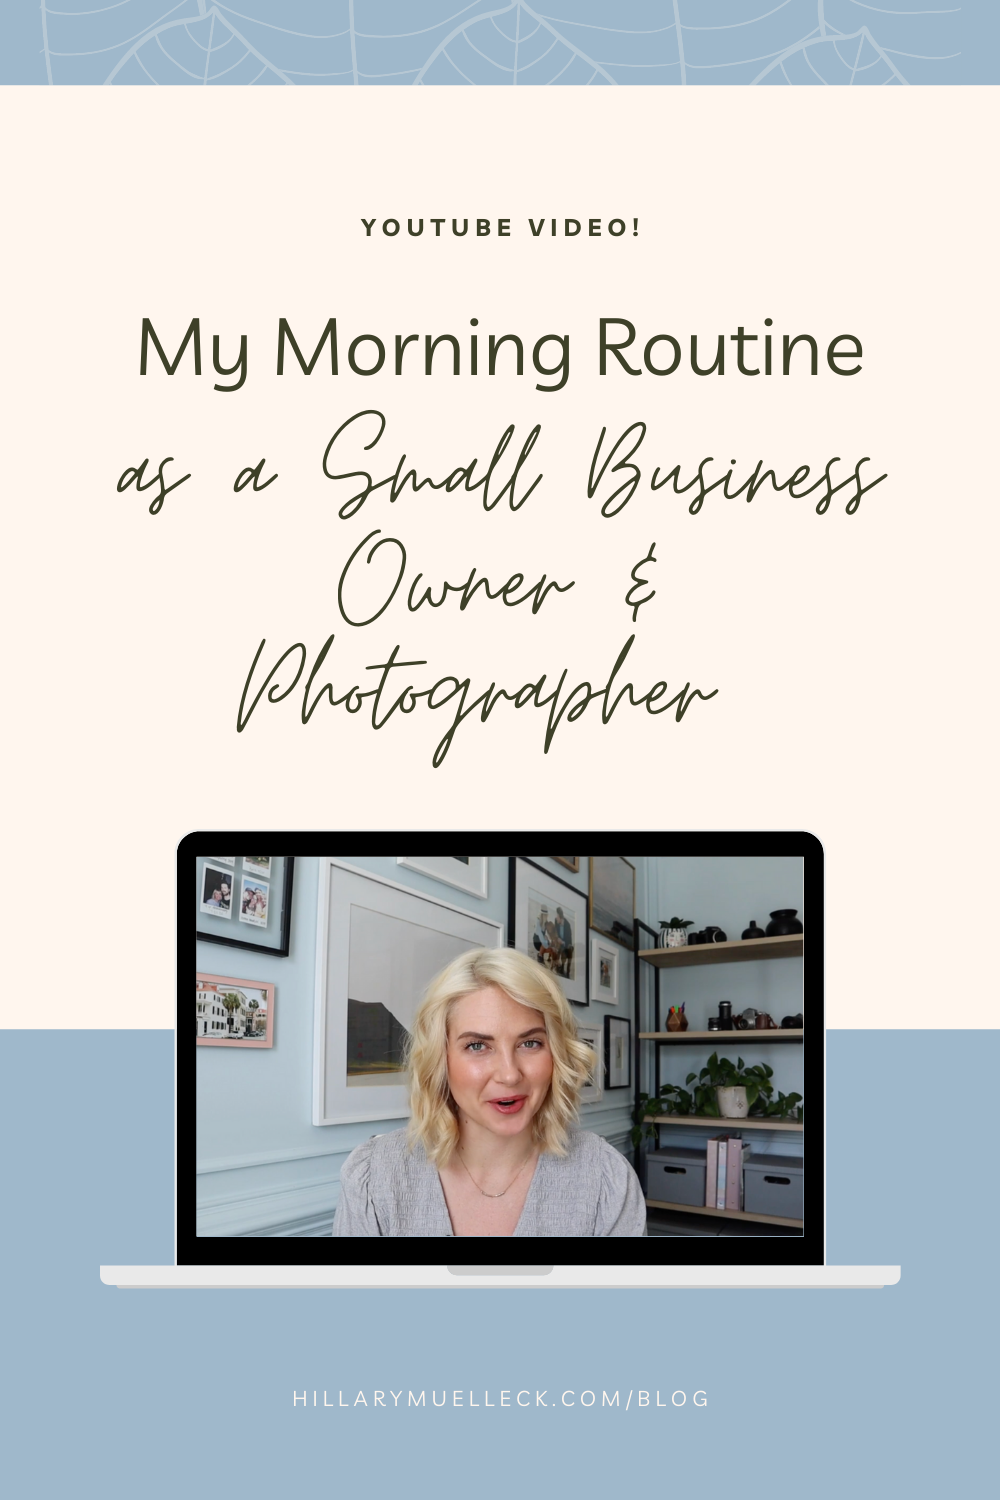 My morning routine as a small business owner: Hillary Muelleck shares how she starts each day for a productive morning